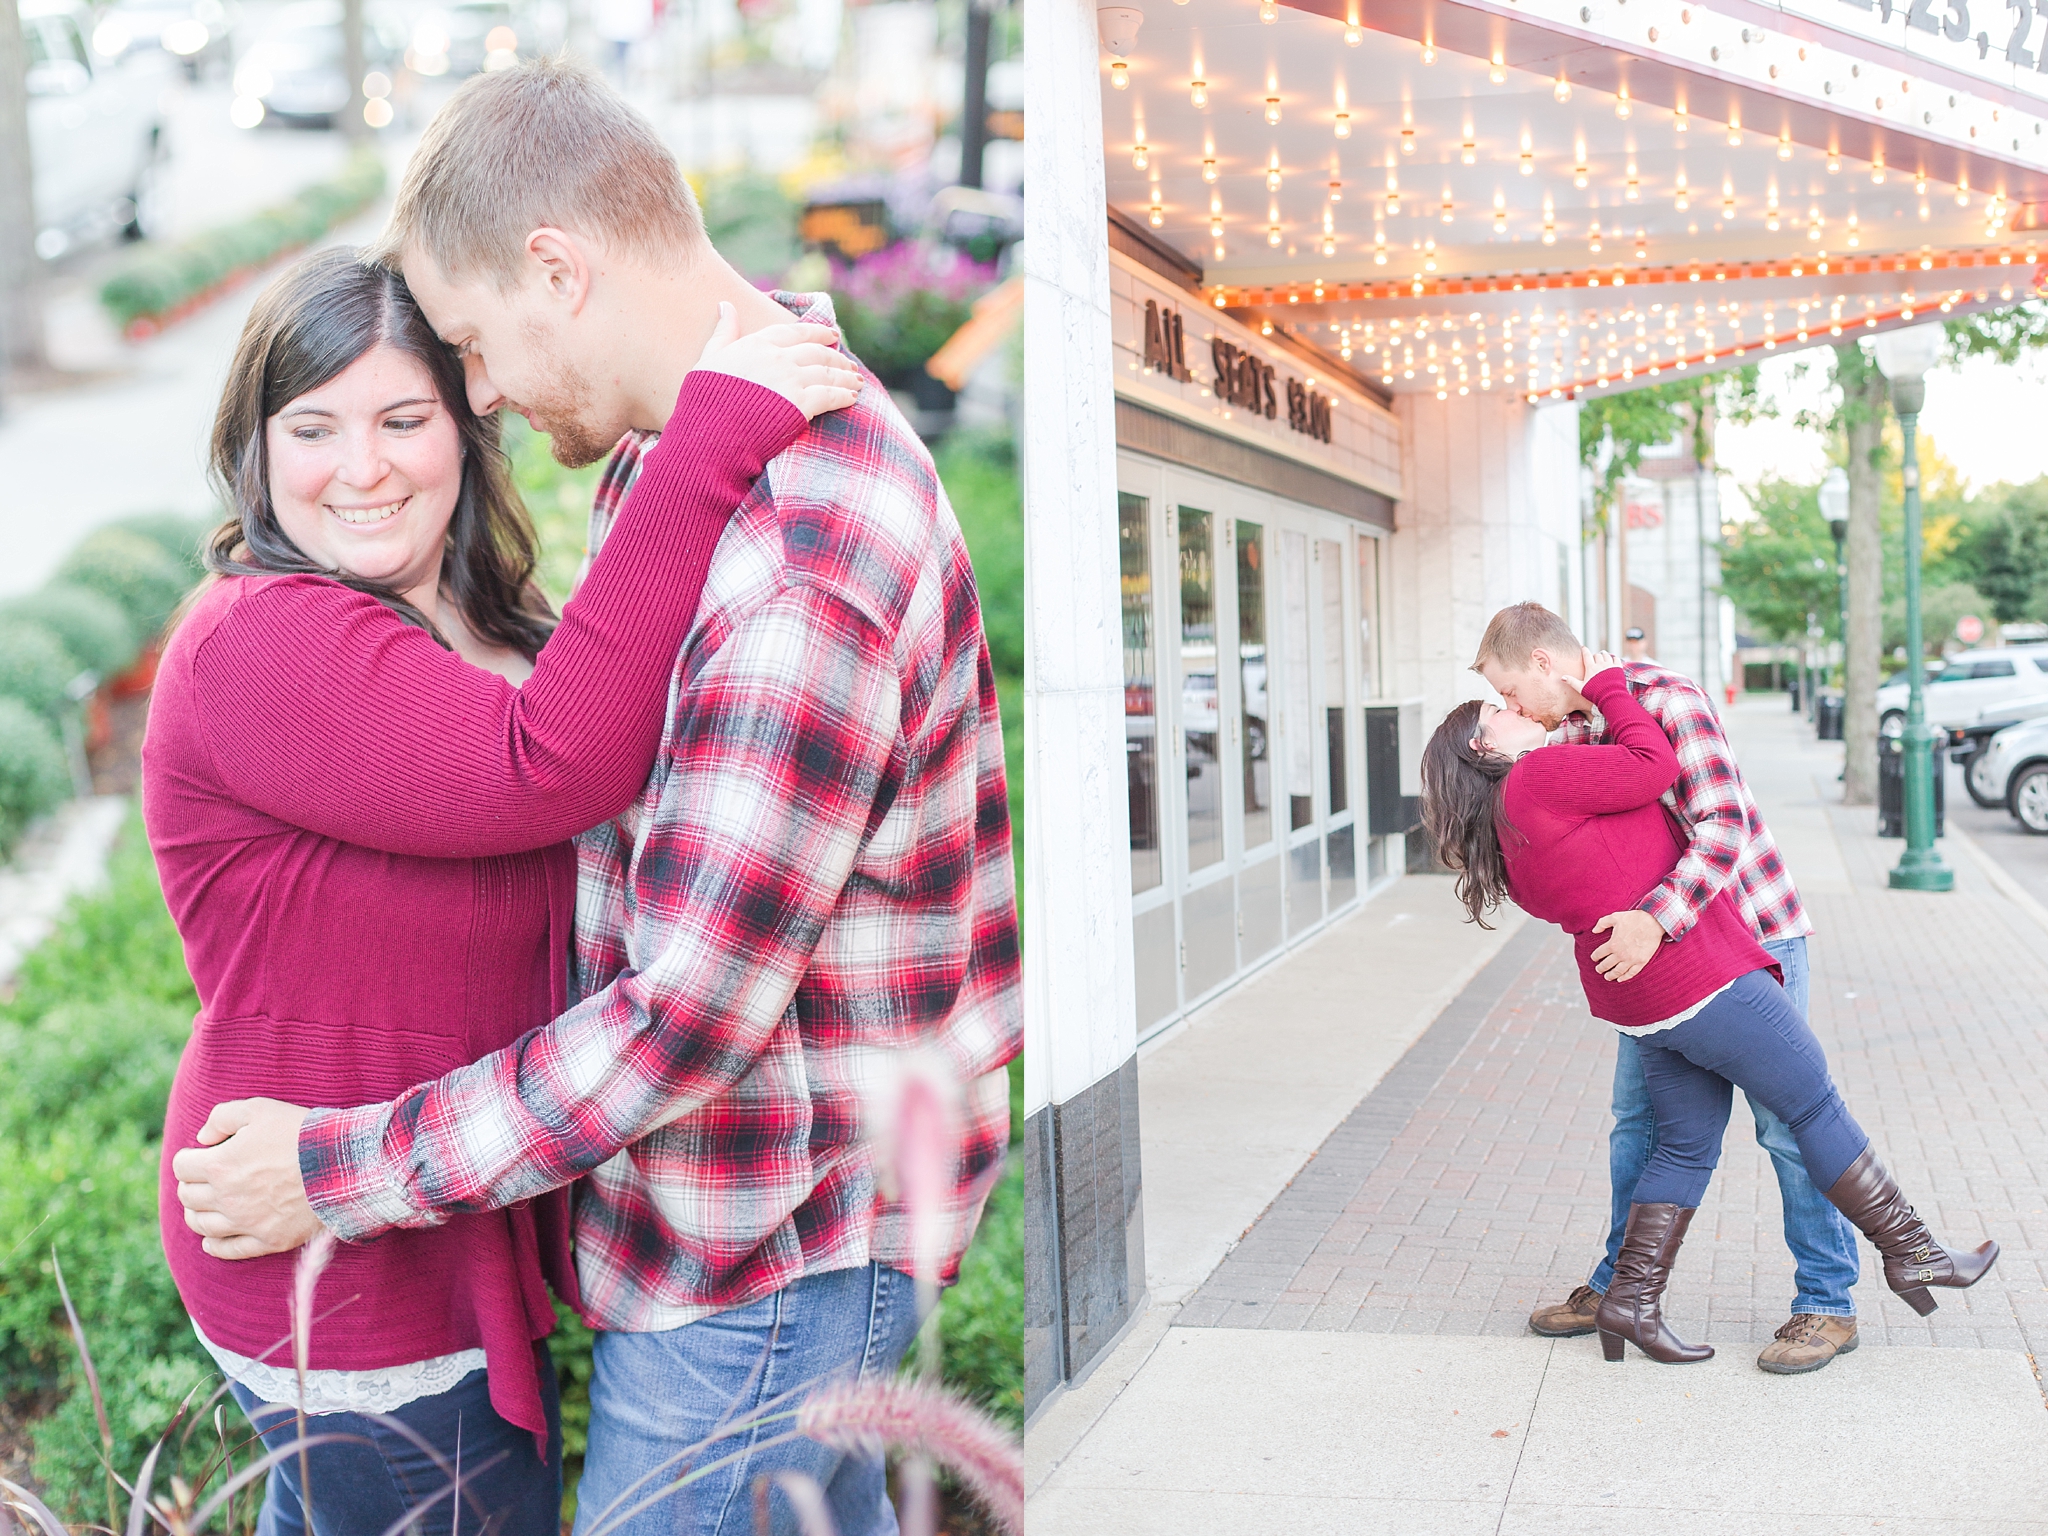 fun-fall-engagement-photos-in-downtown-plymouth-michigan-by-courtney-carolyn-photography_0009.jpg